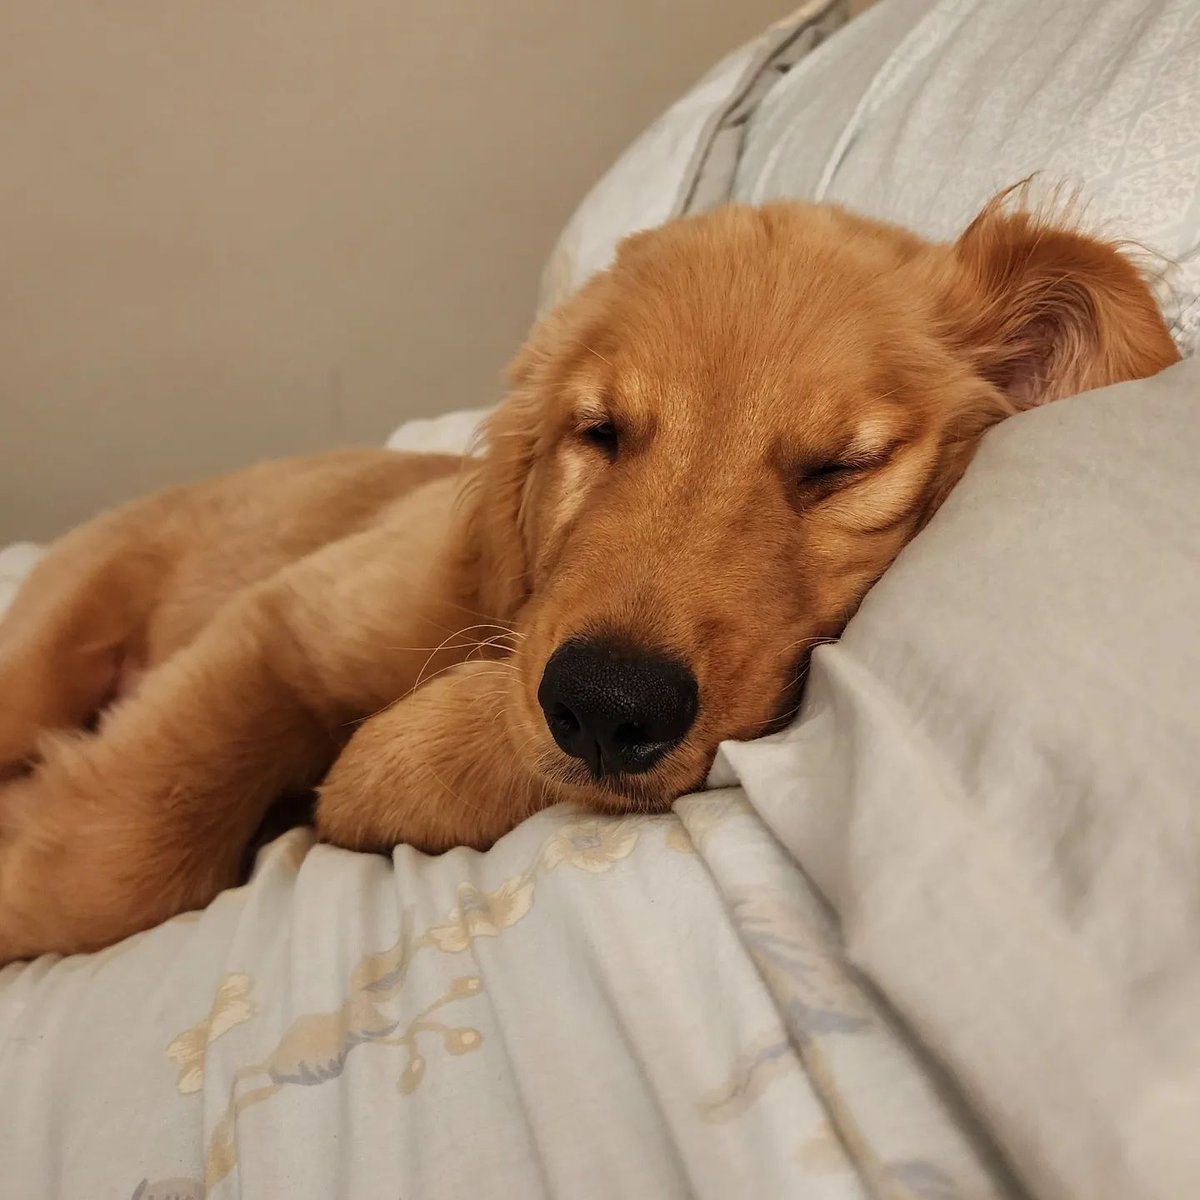 My people's bed is so nice and cozy this morning. Rate This Cuteness 10-100??📷📷 - #dog #dogs #scotland #dogsoftwitter #Easter2023 #captainchaos #puppylove #puppies #goldenretriever